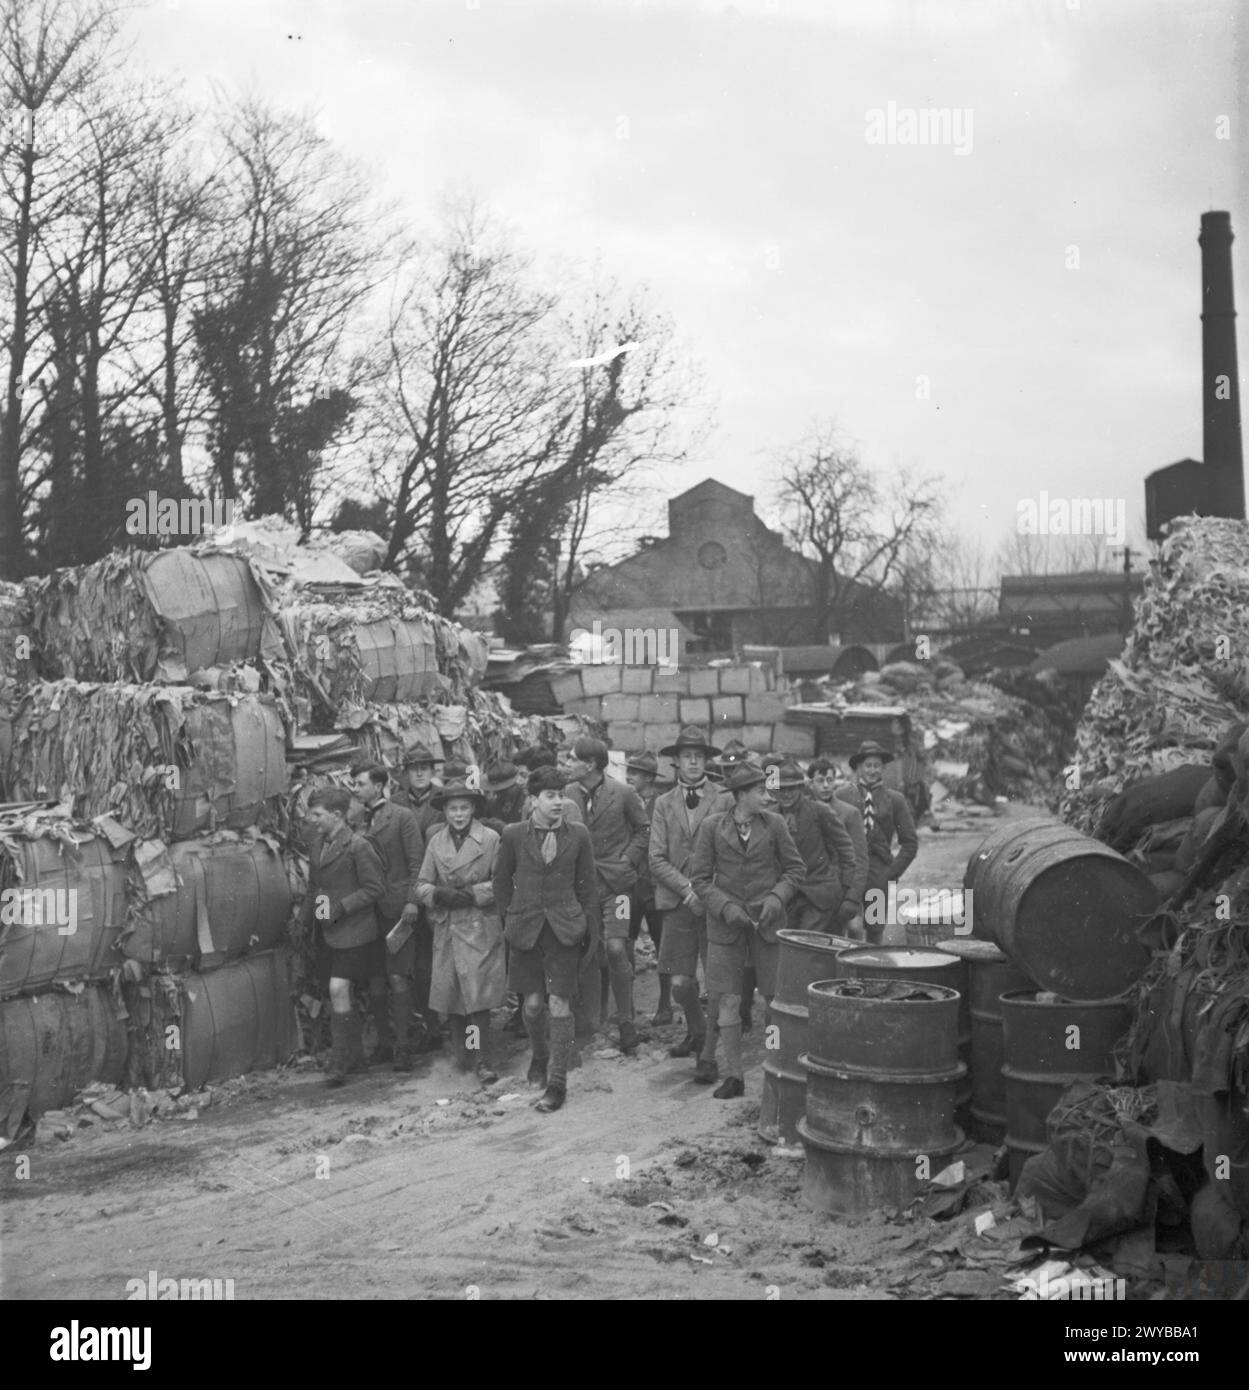 SALVAGE IN WARTIME BRITAIN: BOY SCOUTS VISIT A PAPER MILL, UK, 1943 - A group of Boy Scouts from Eton College walk between piles of salvaged materials during their visit to a paper mill, somewhere in Britain. Members of the Boy Scout Movement played a huge part in the paper salvage campaigns across the country during the War. , Stock Photo